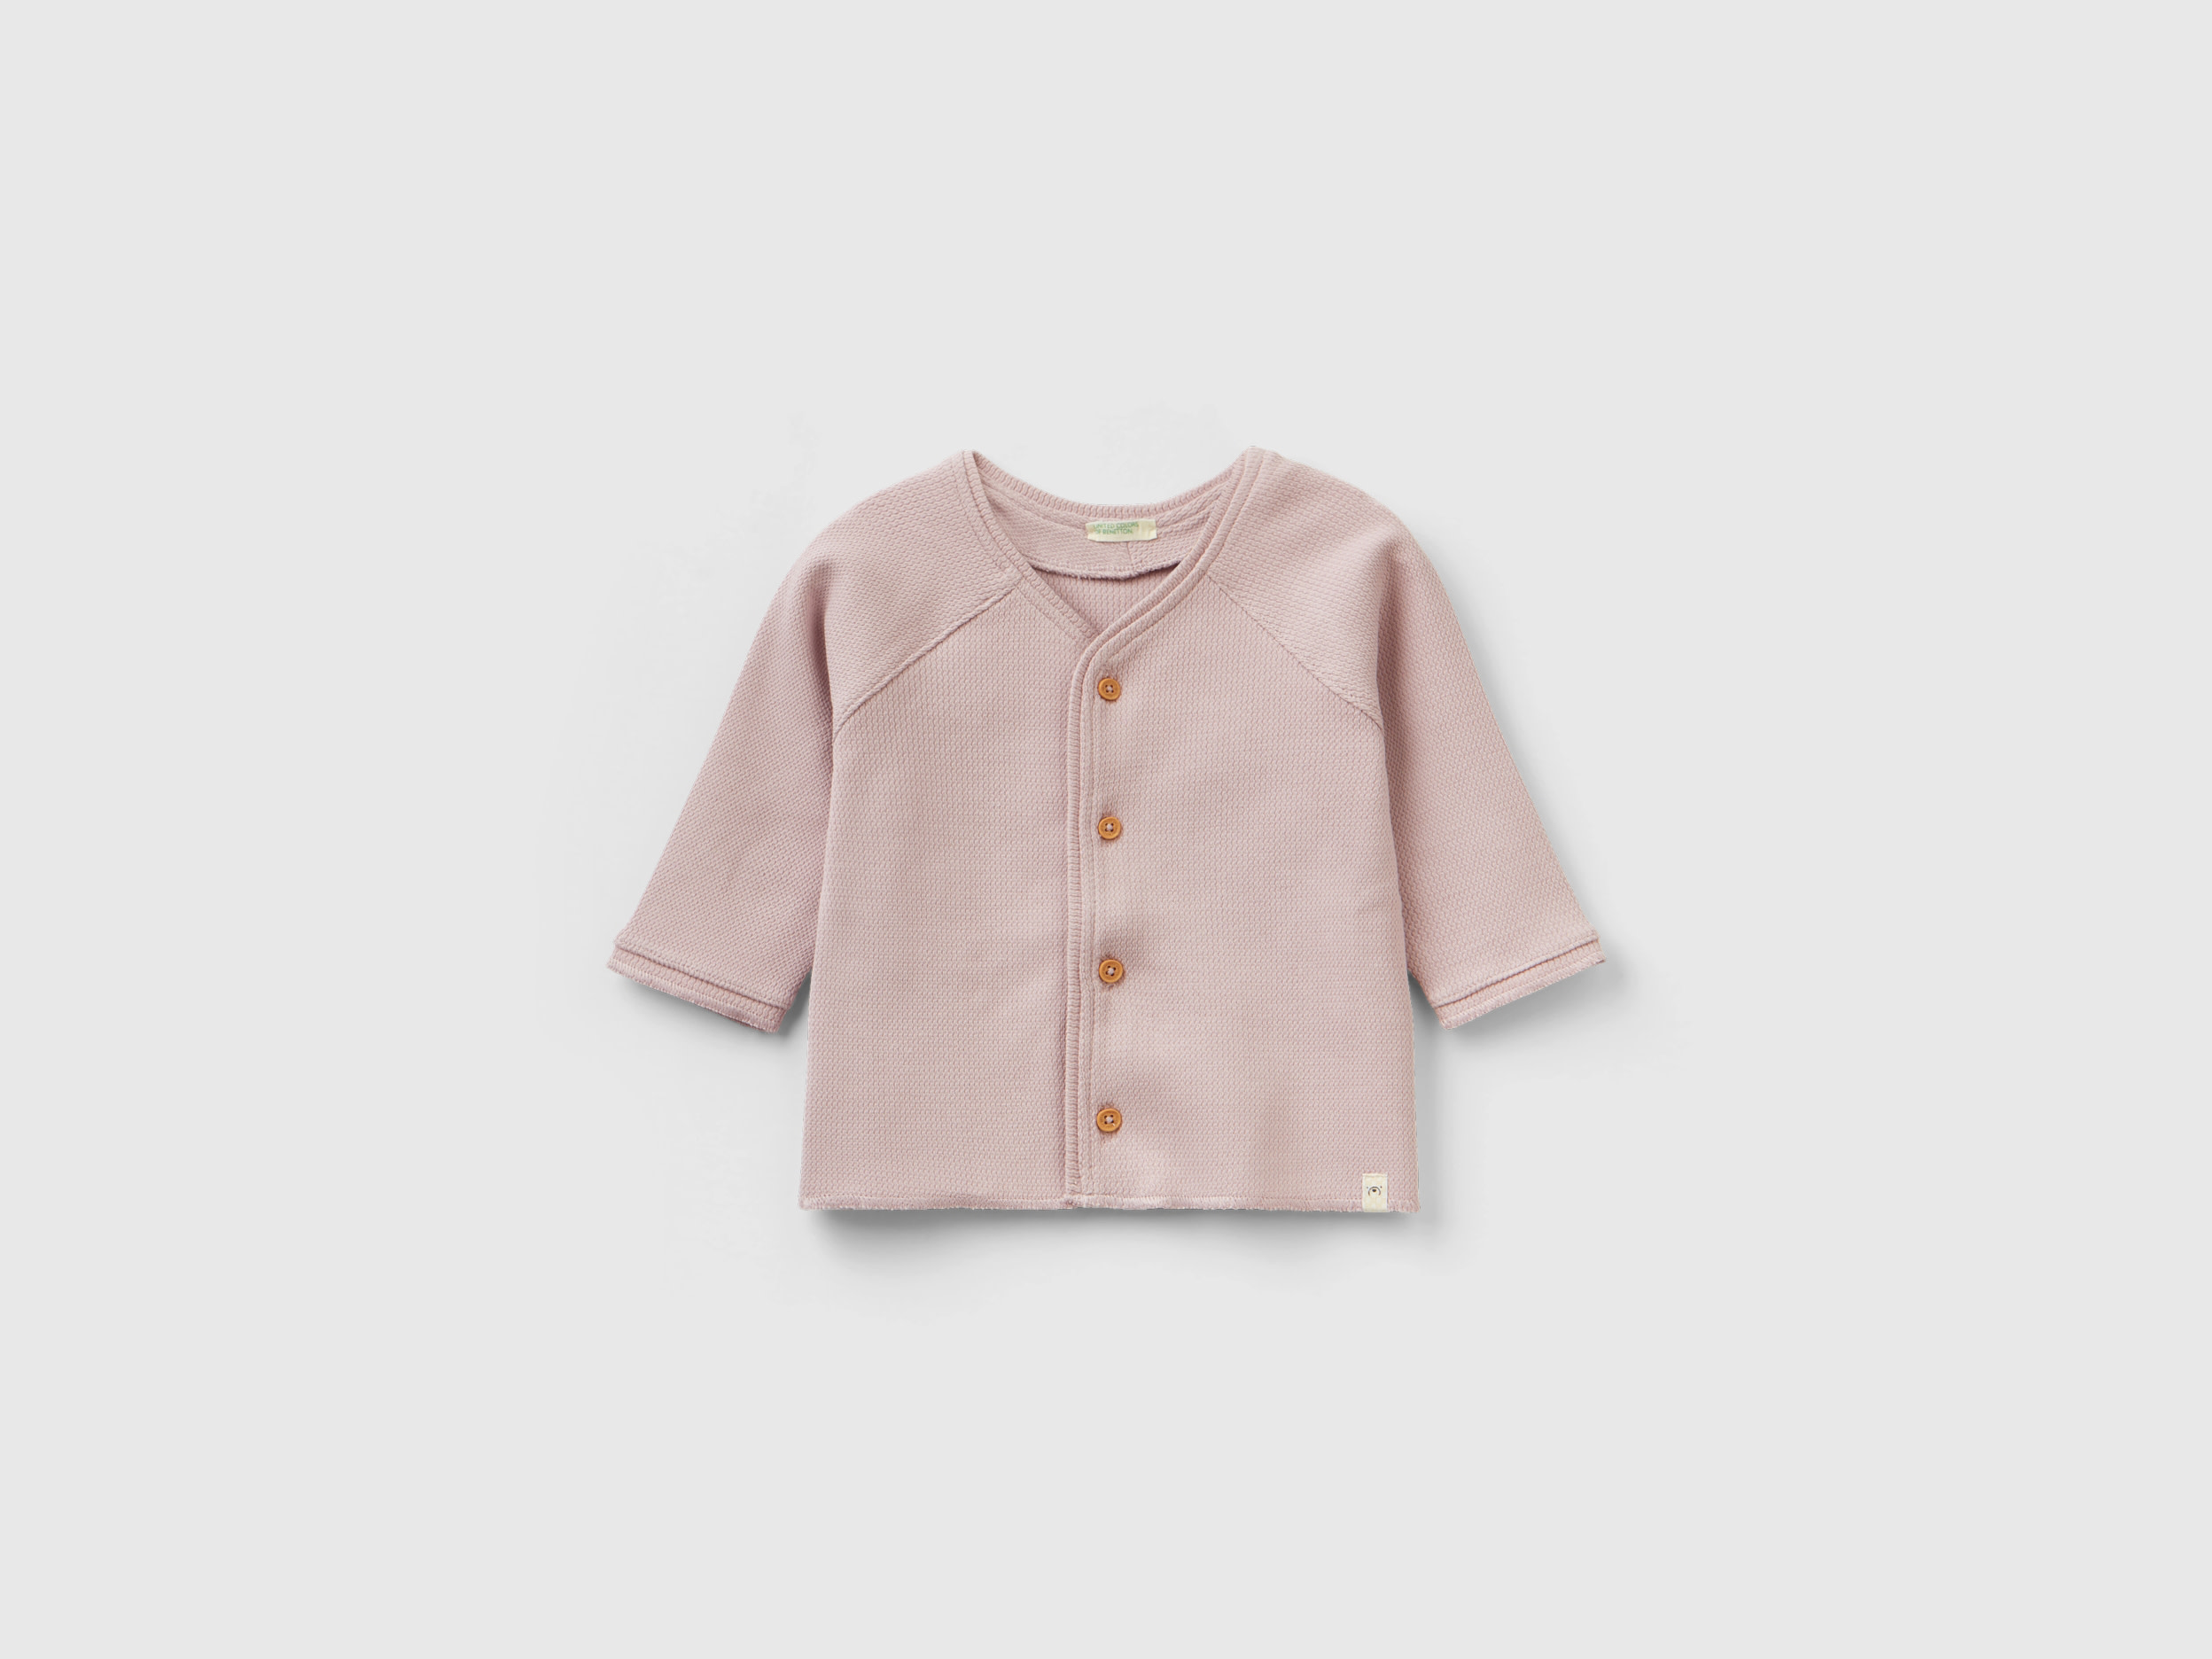 Benetton, Sweatshirt With Buttons, size 6-9, Pink, Kids